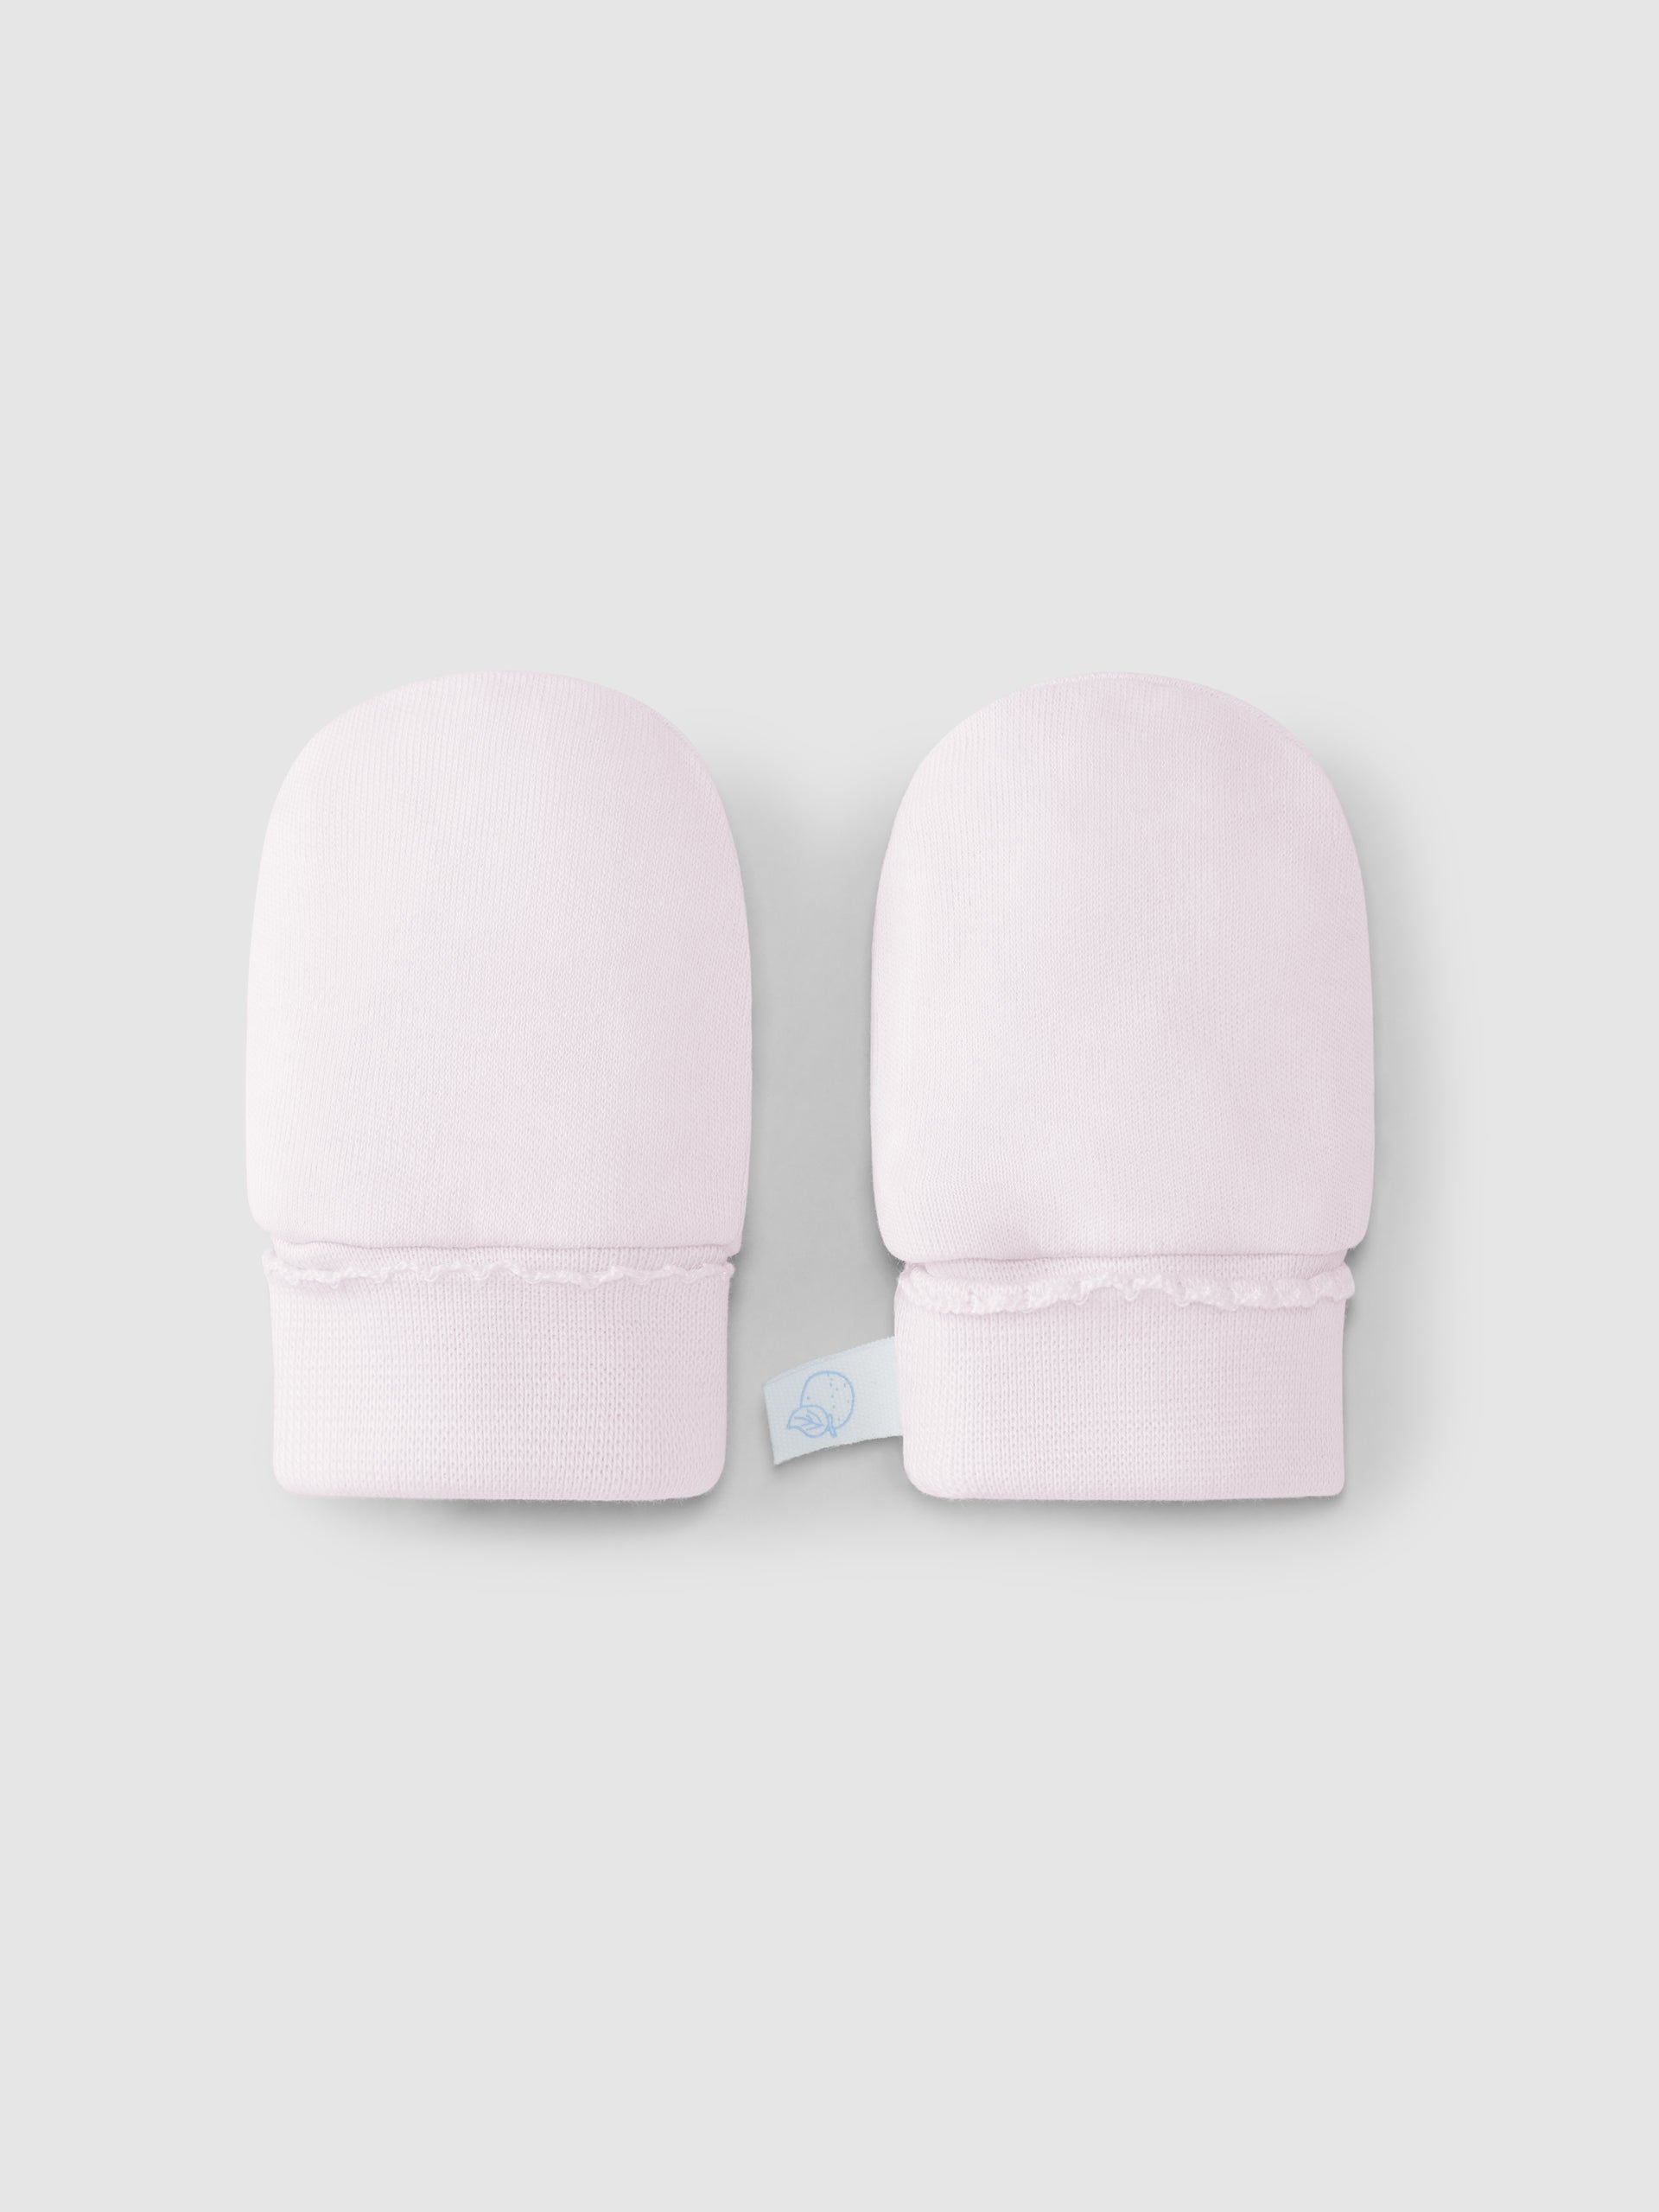 Plain Mittens with embroidered effect finish